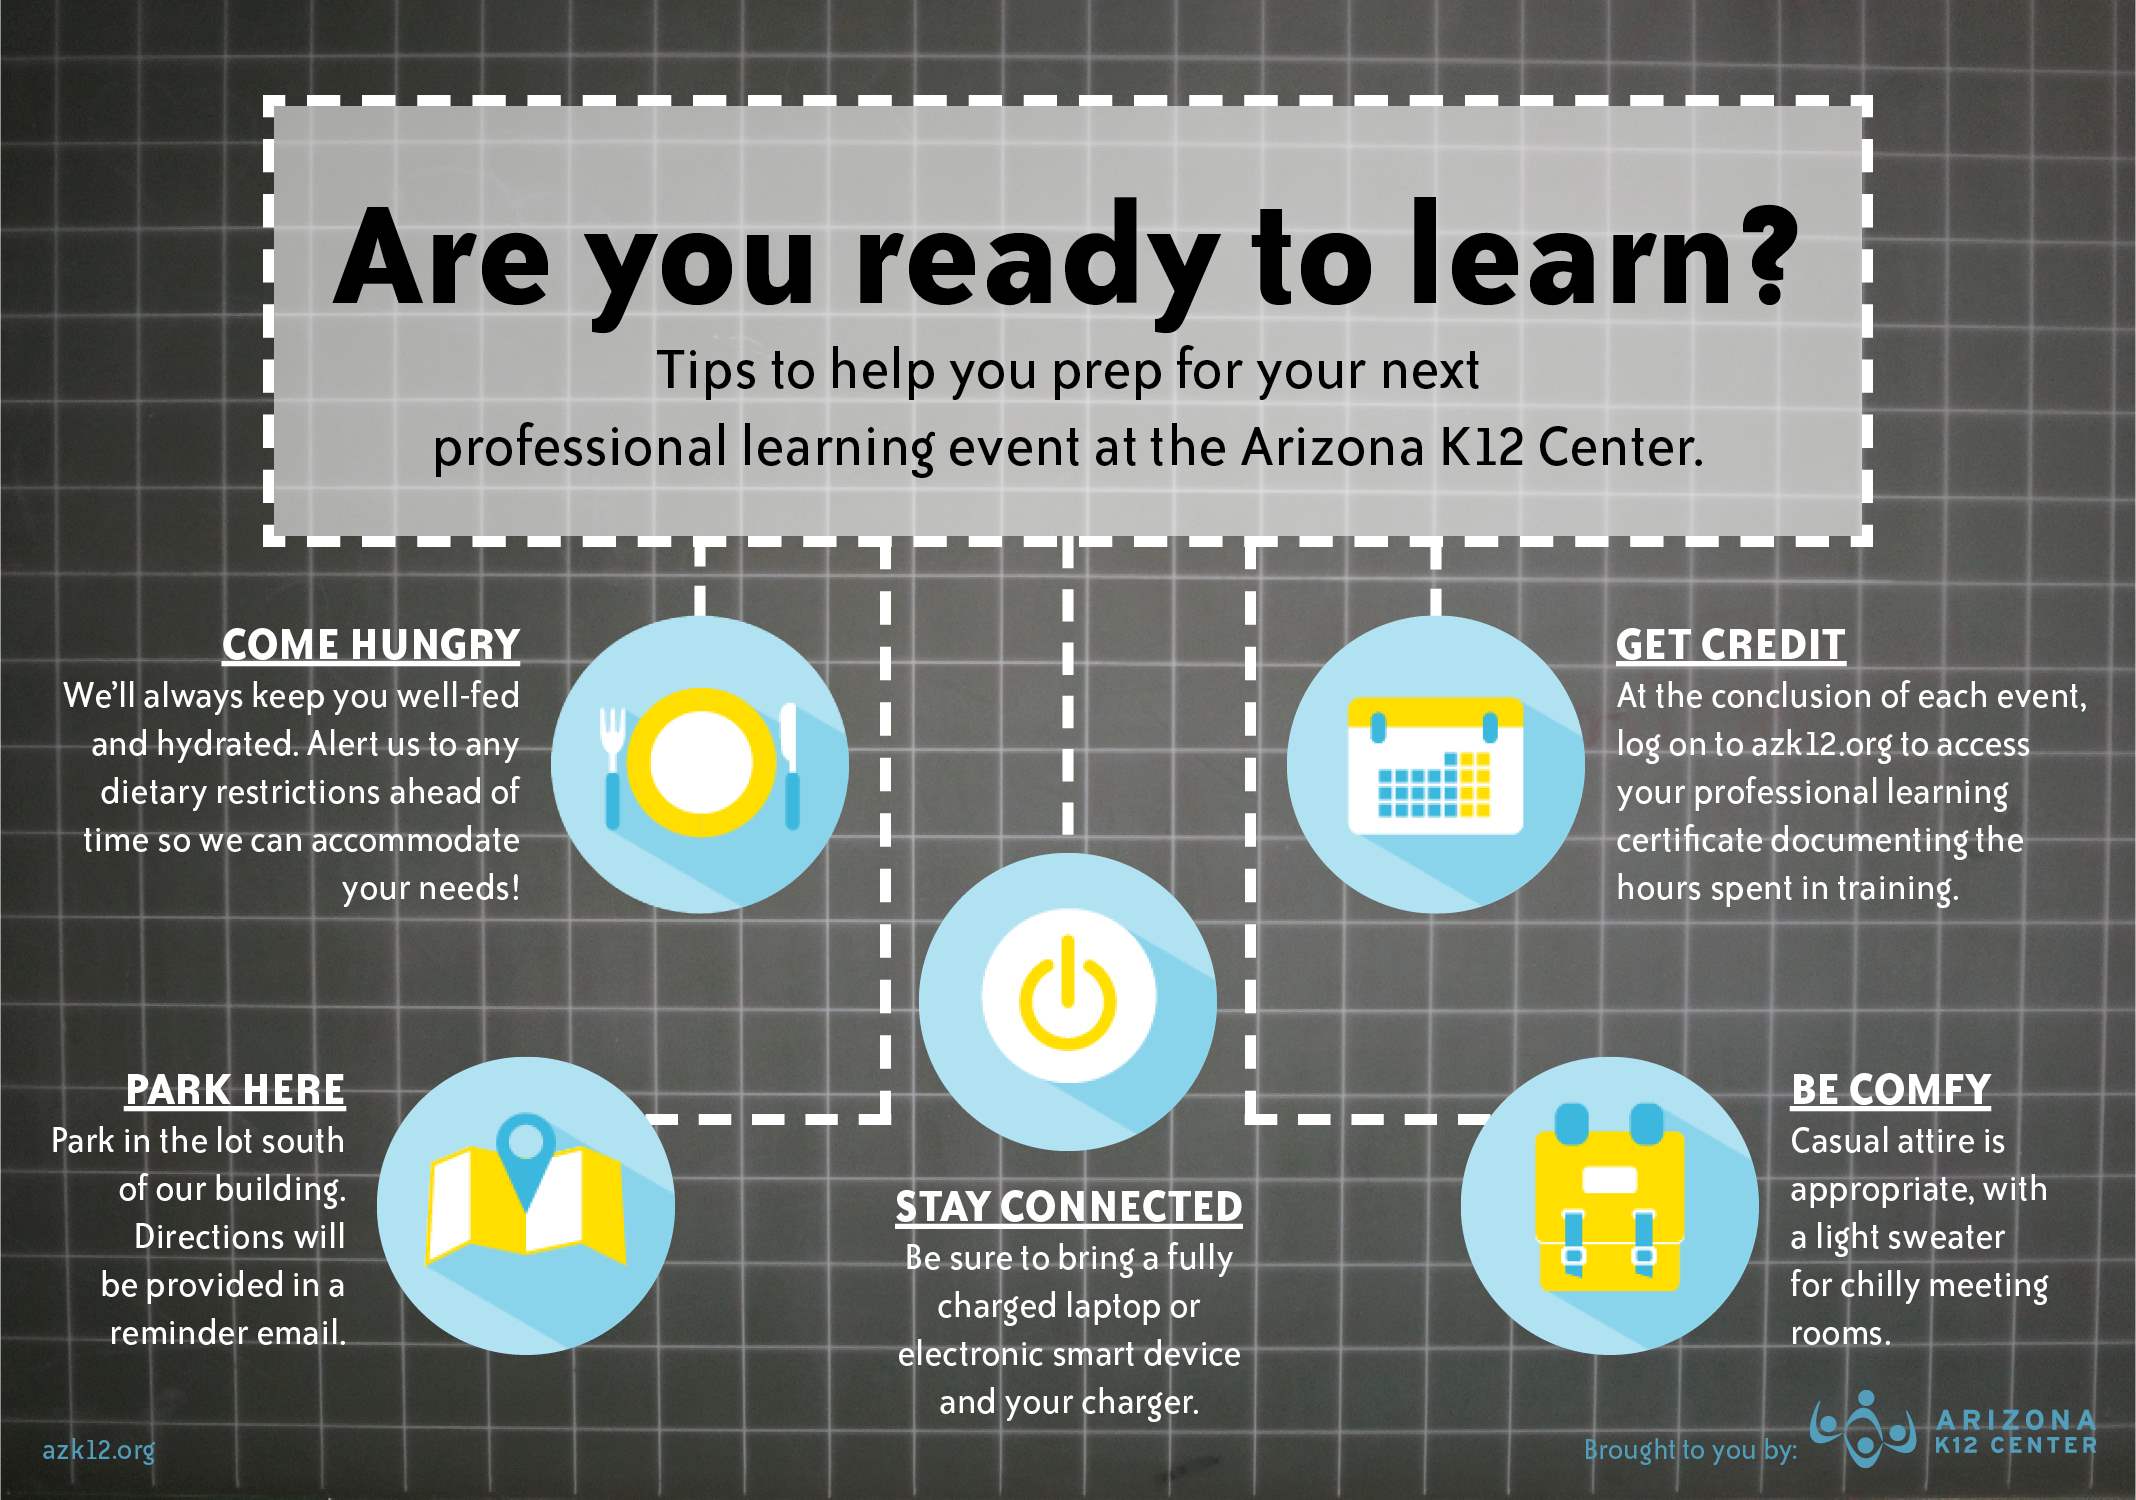 Tips for Learning with the Arizona K12 Center